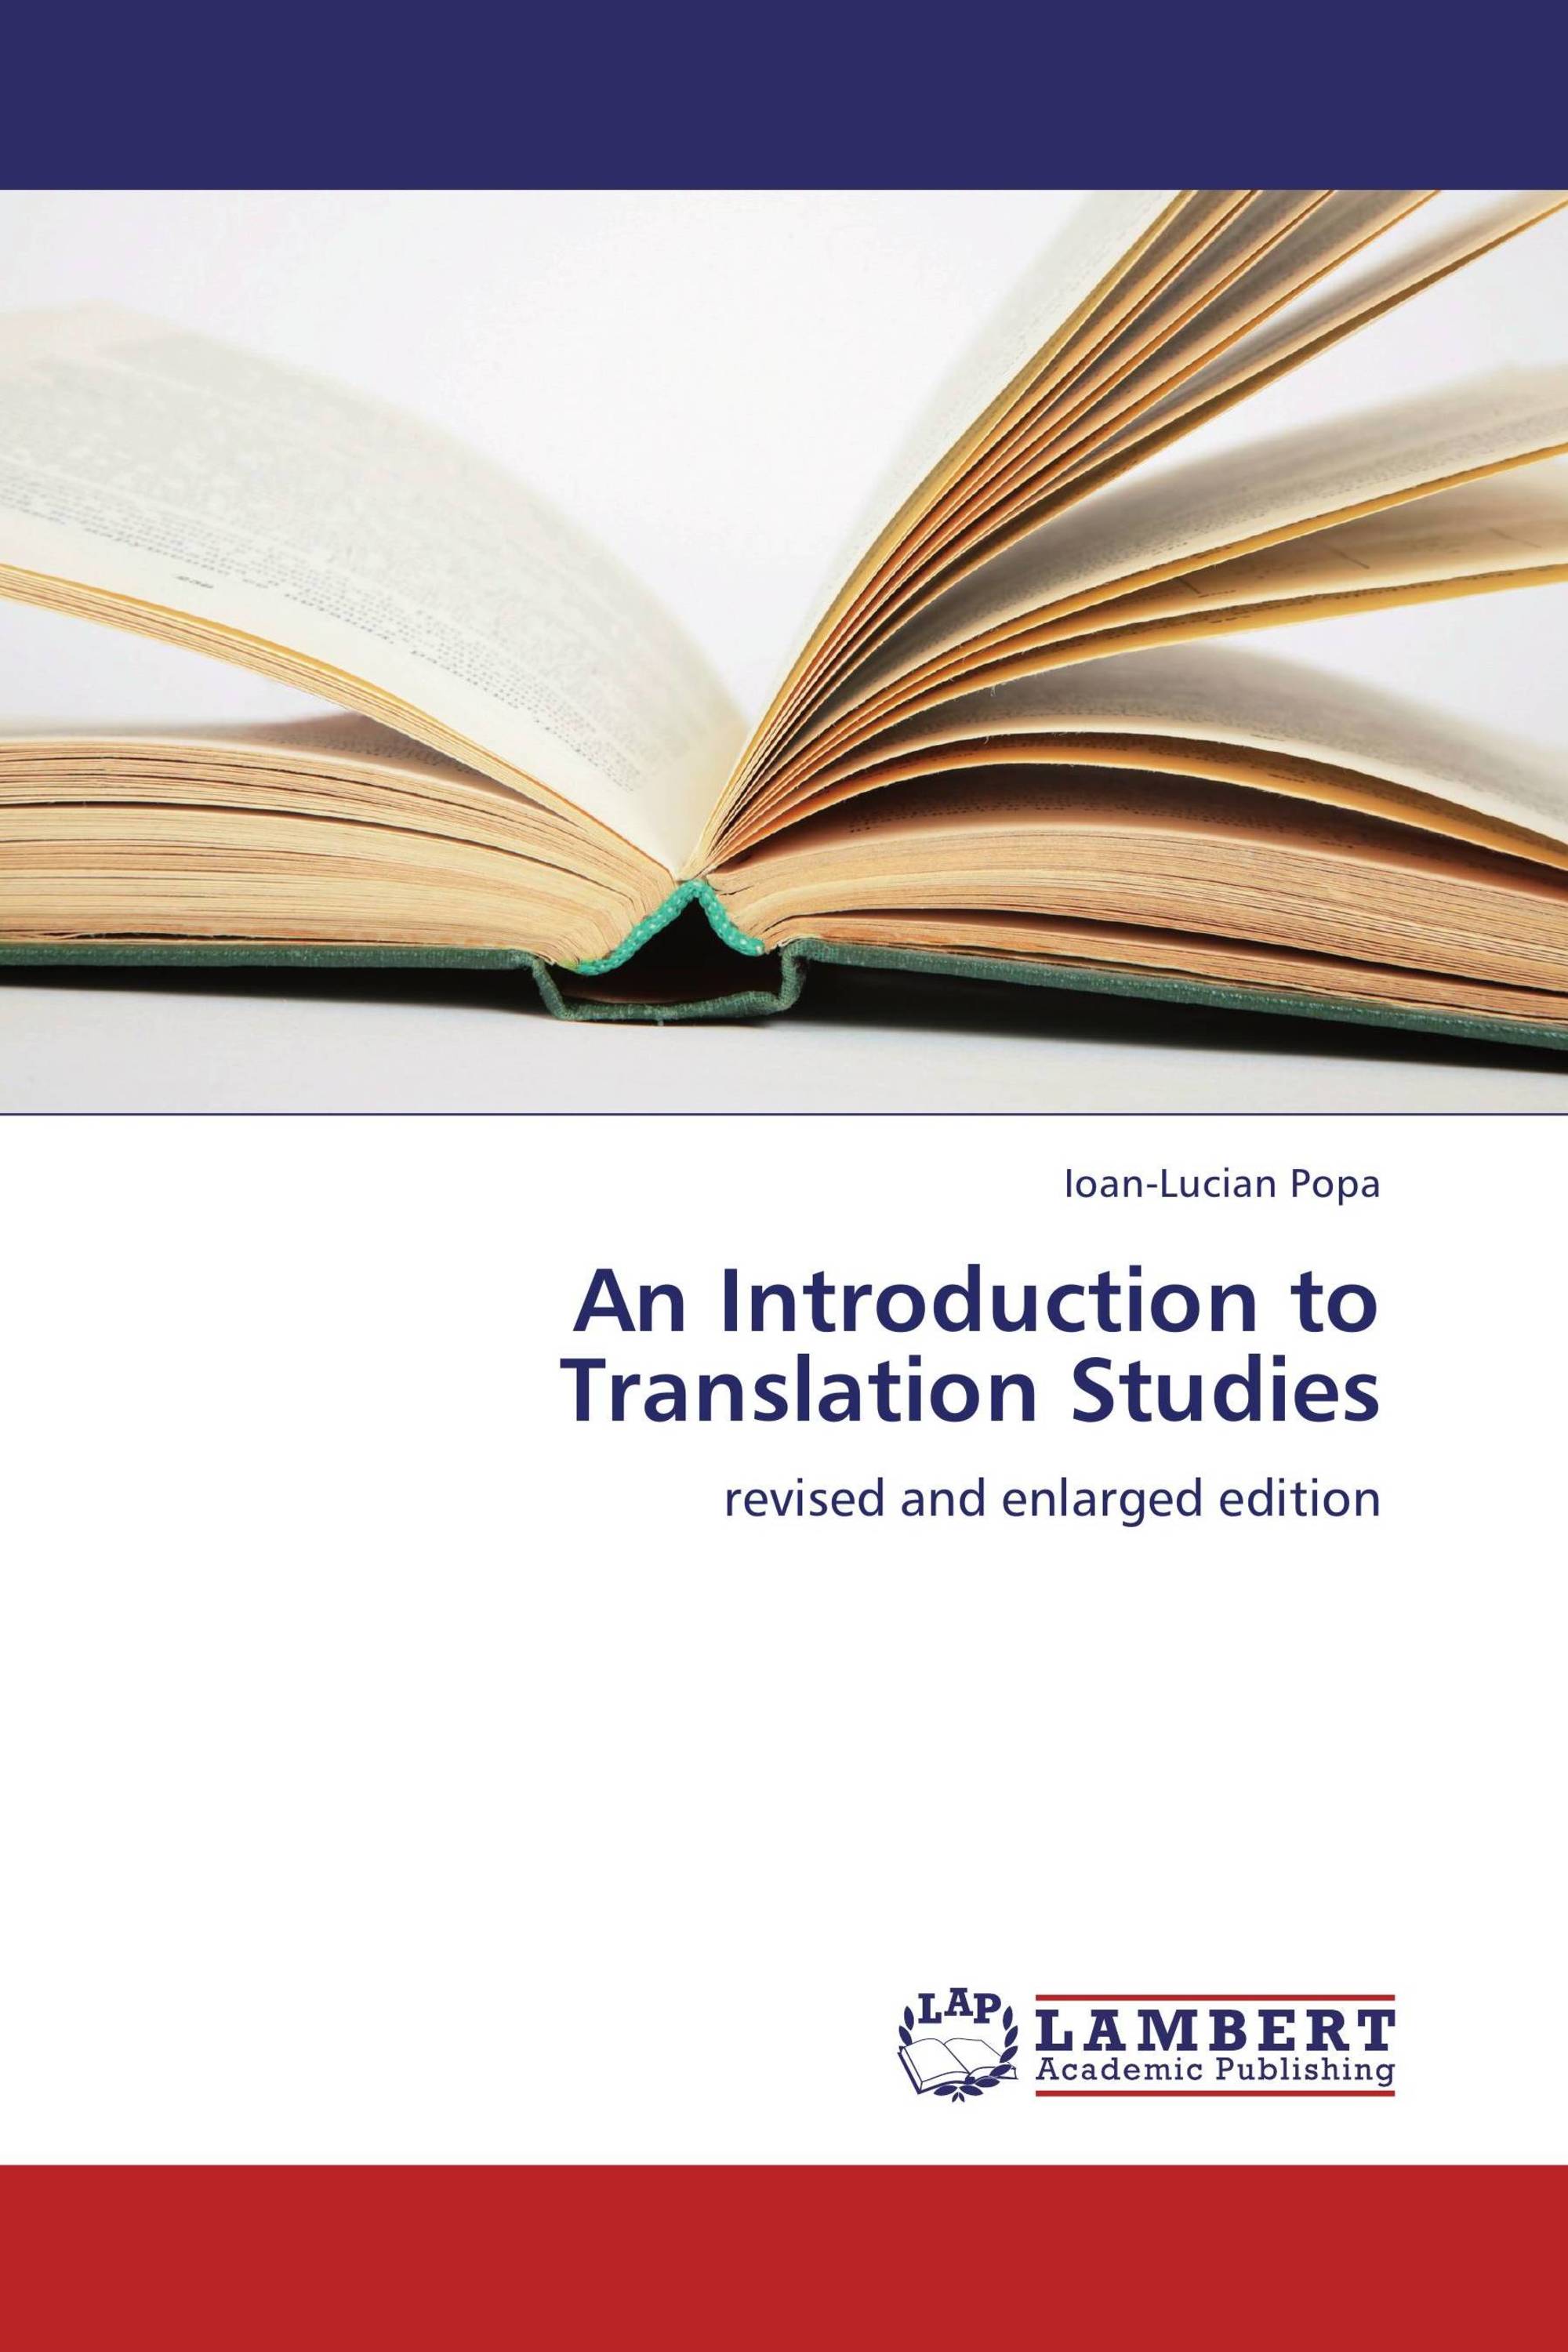 book review translation